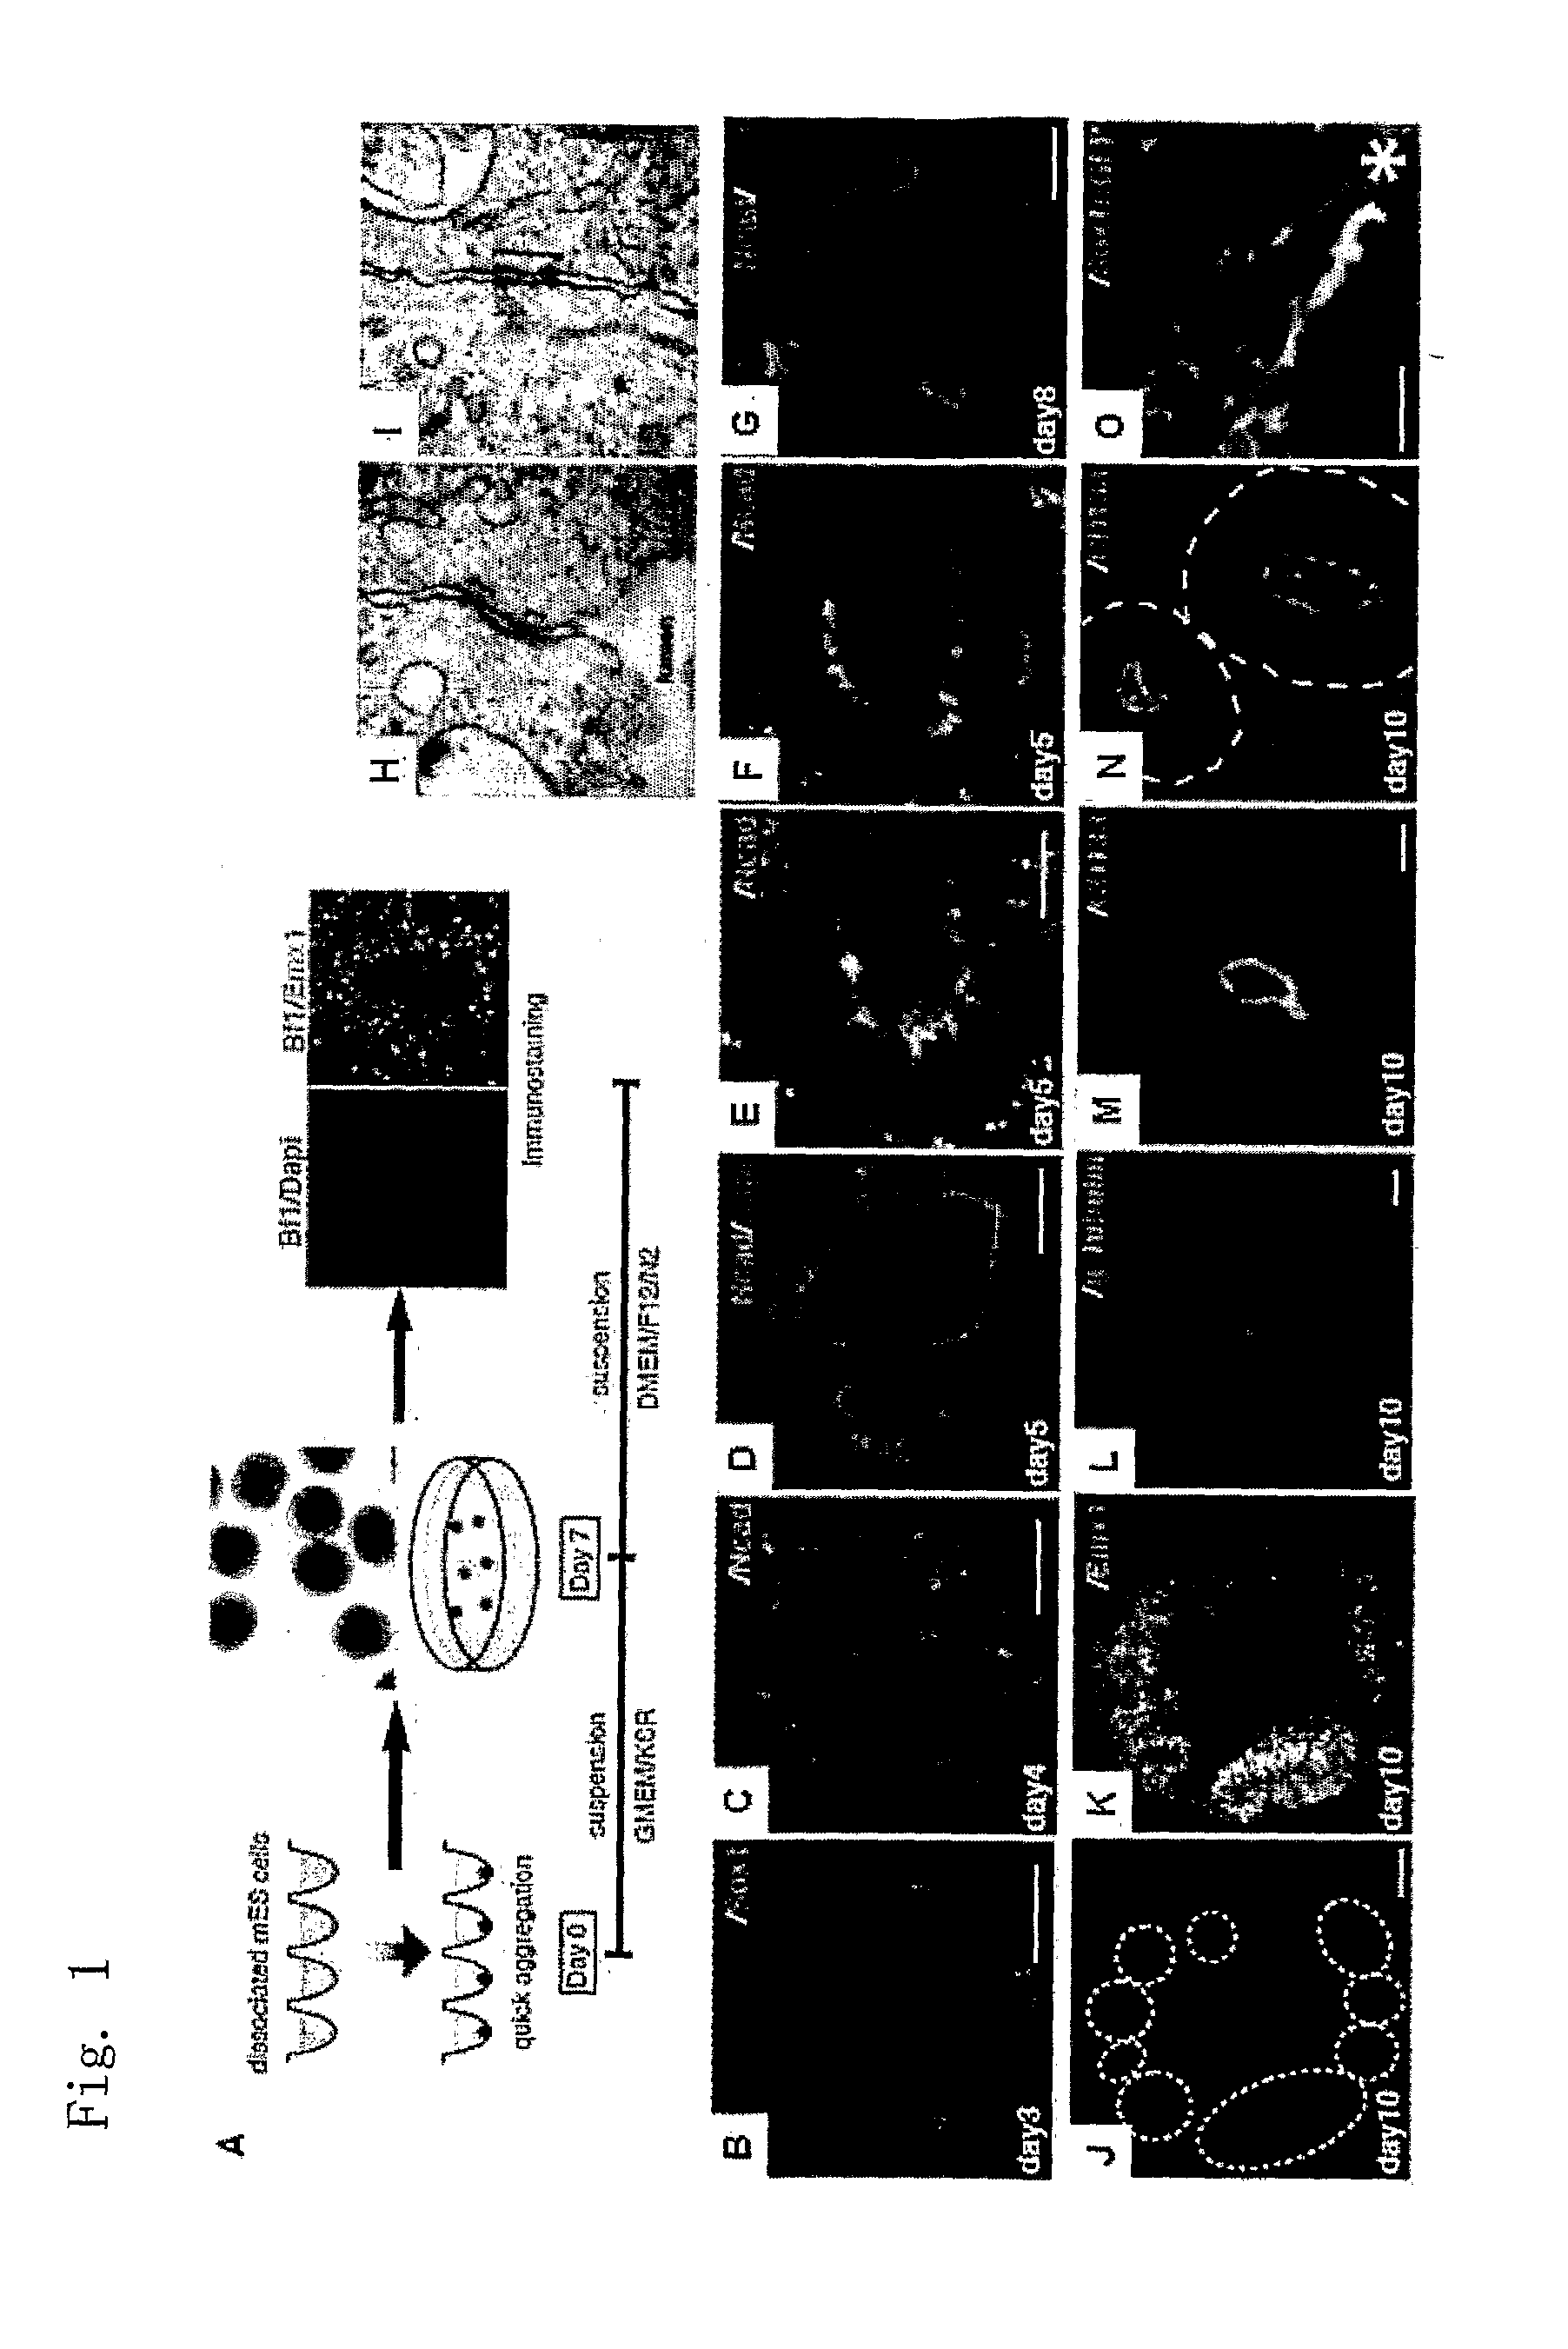 Method for differentiation induction in cultured stem cells